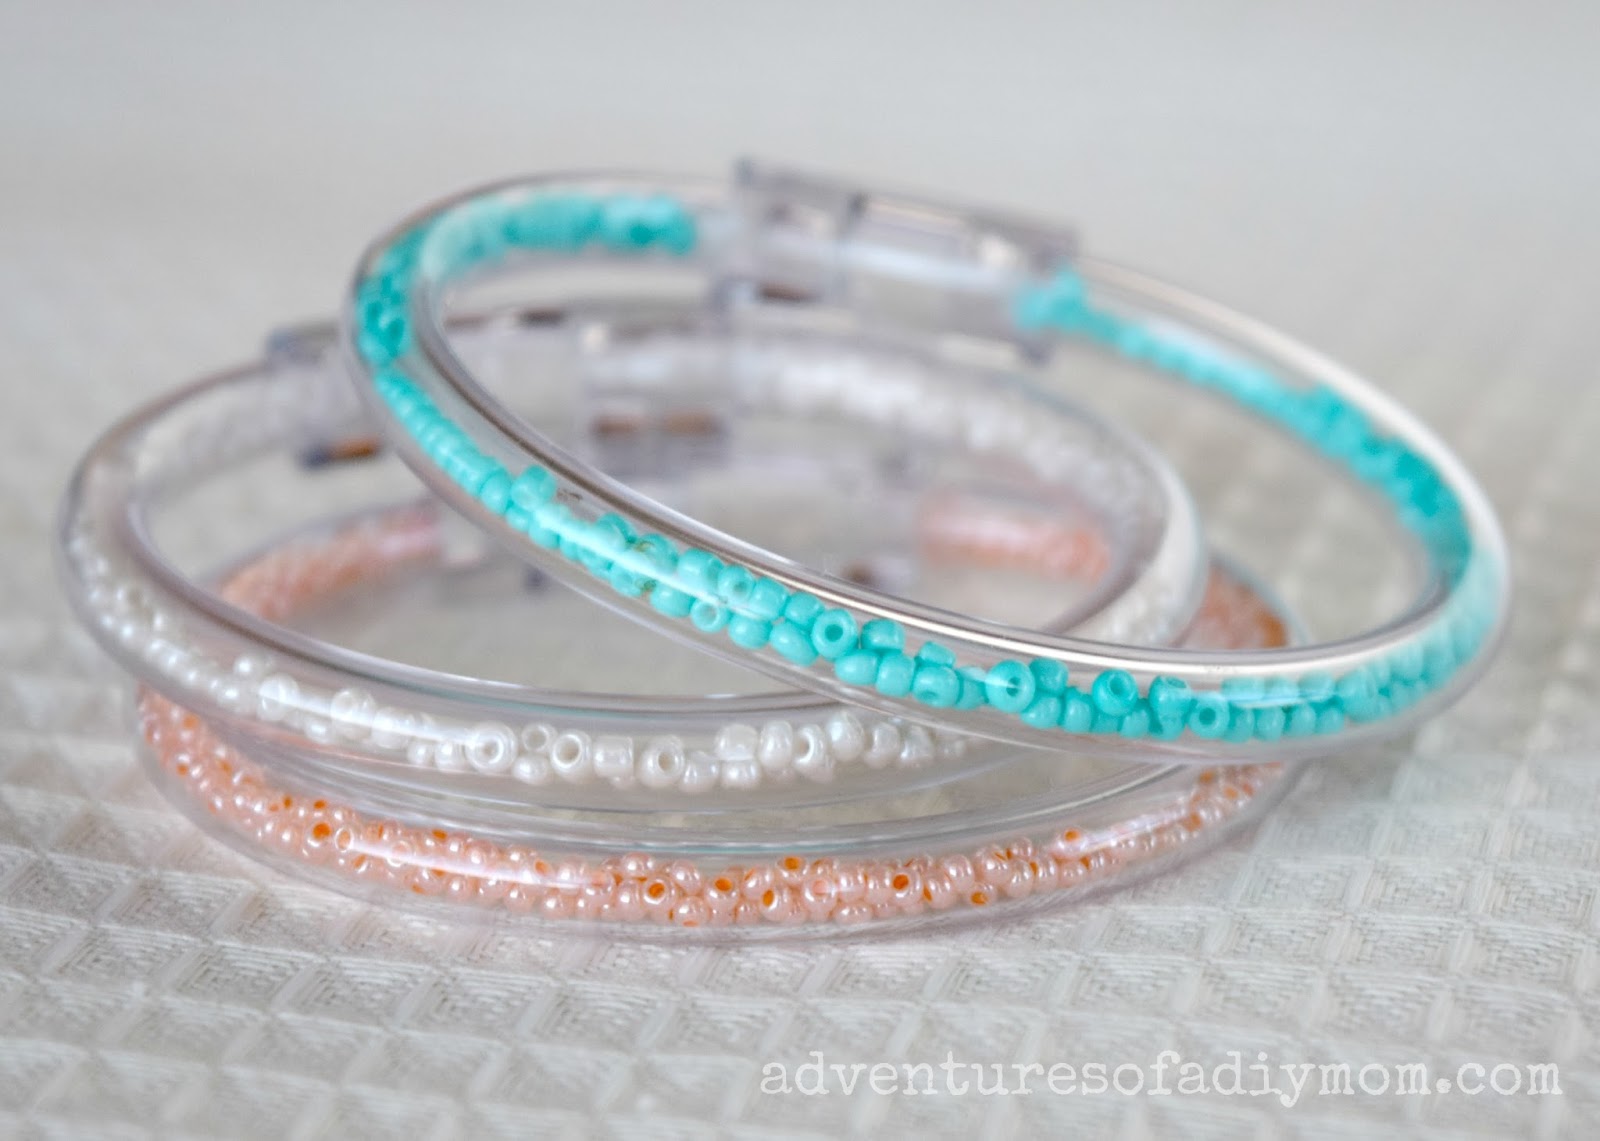 Clear Tube Seed Bead Bracelets Adventures Of A Diy Mom,How Many Shots In A Handle